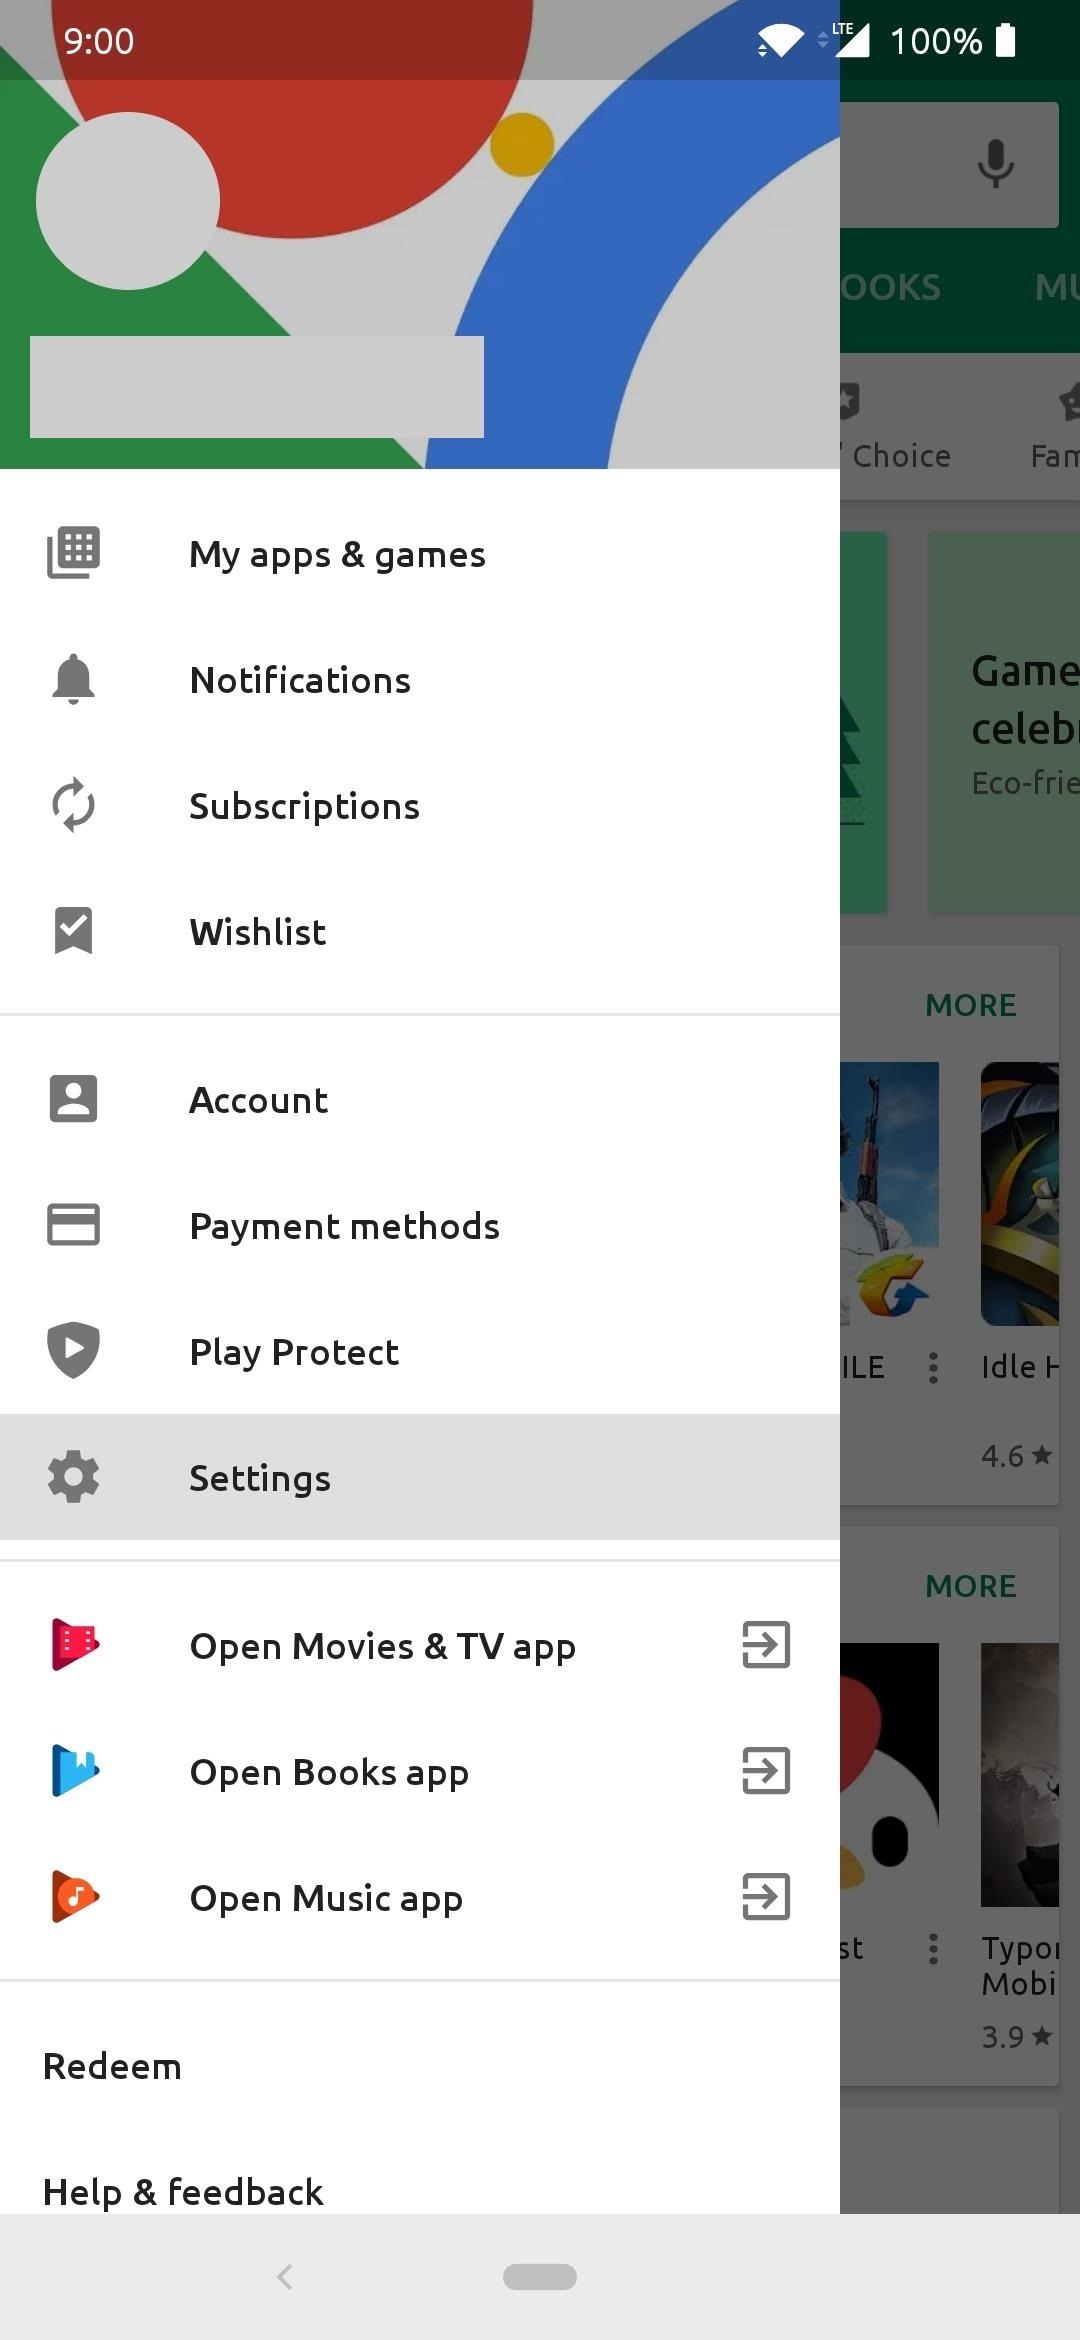 How to Fix Play Store Uncertified Errors When You Forget to Flash Magisk